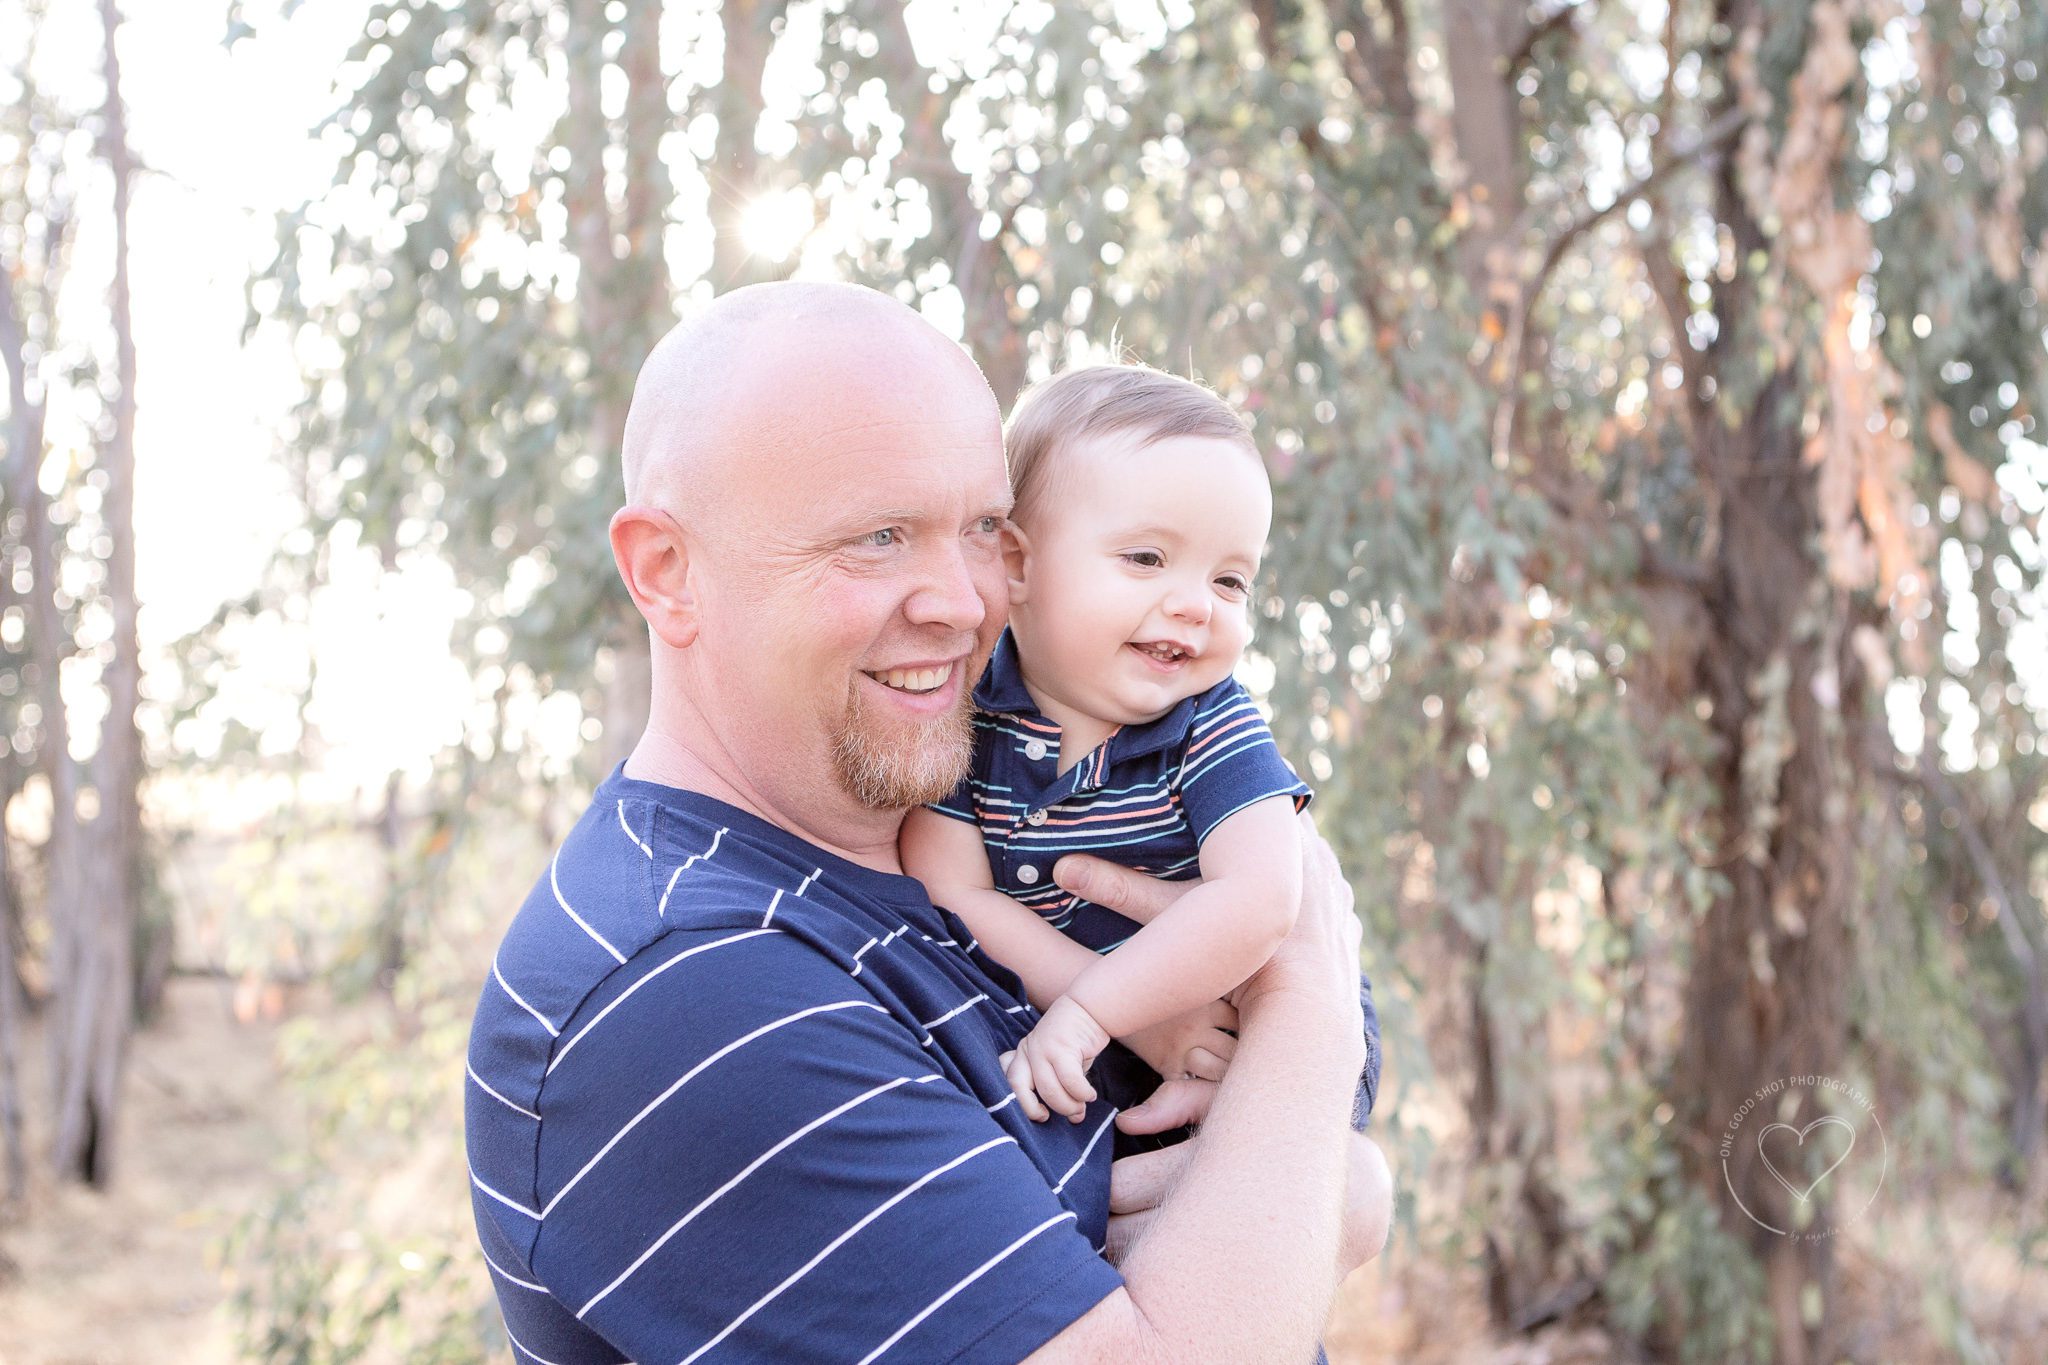 Fresno Baby Photographer, father son pictures, cheek to cheek, smiling